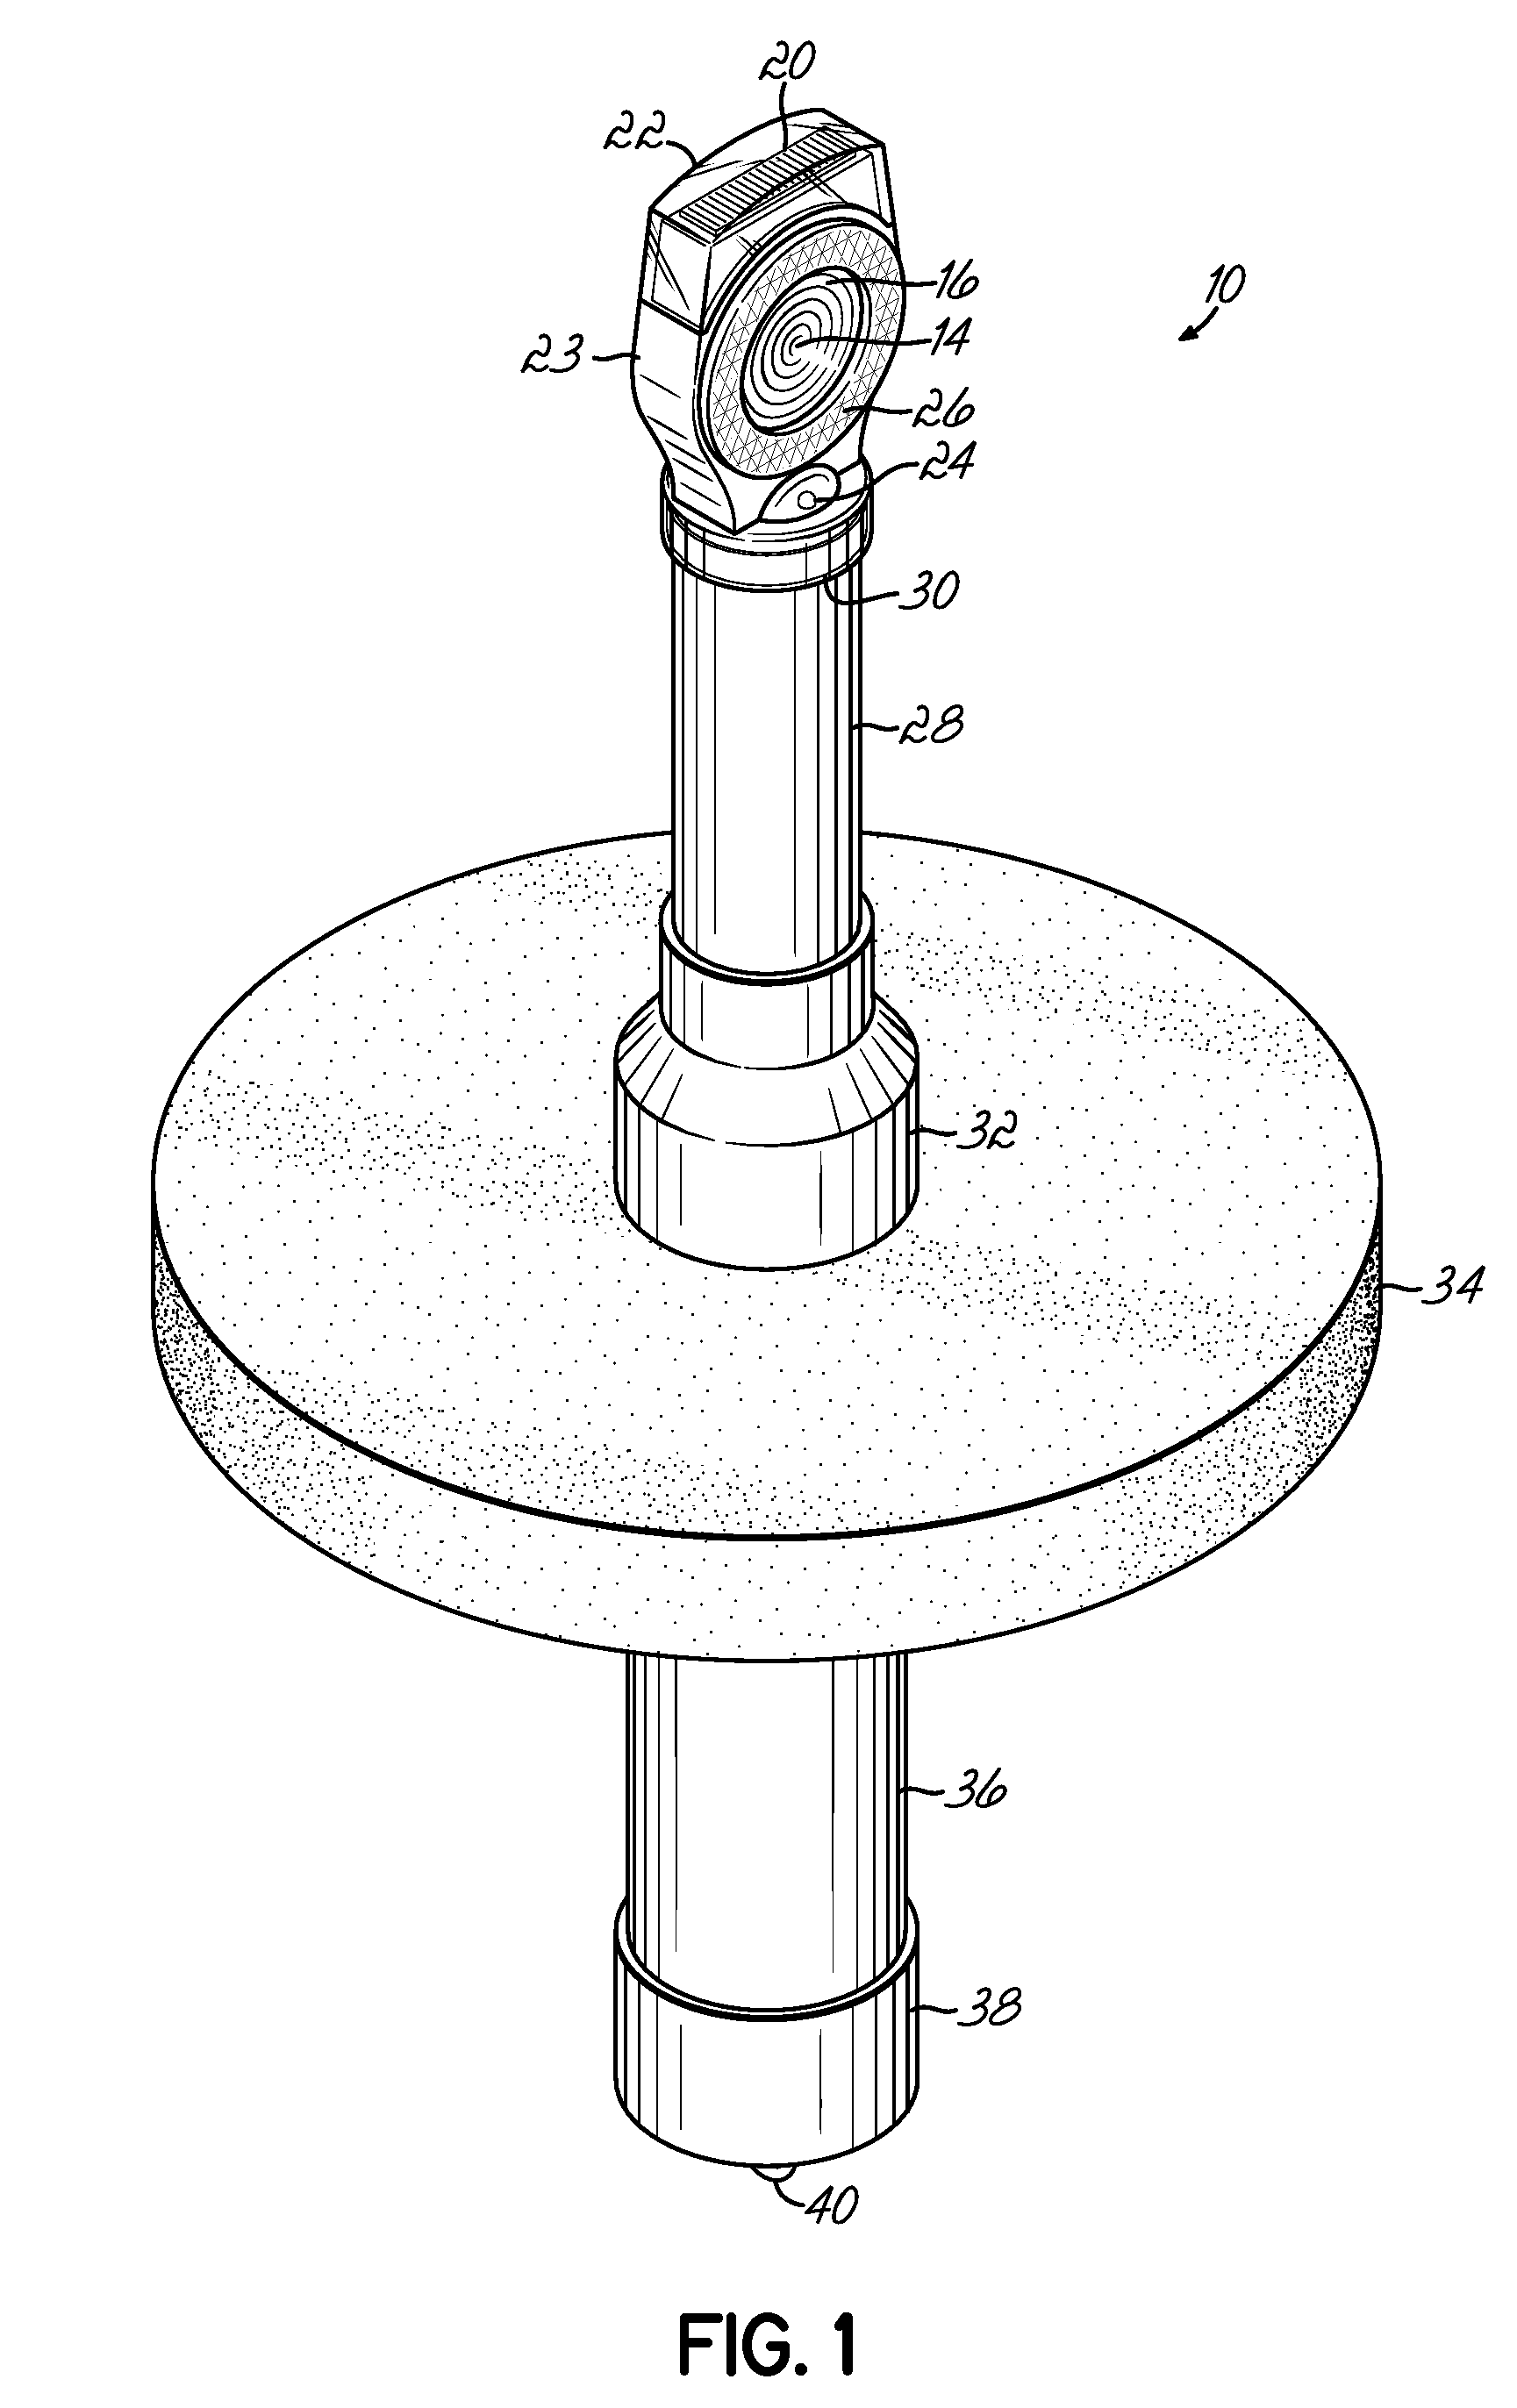 Method and apparatus for repelling geese